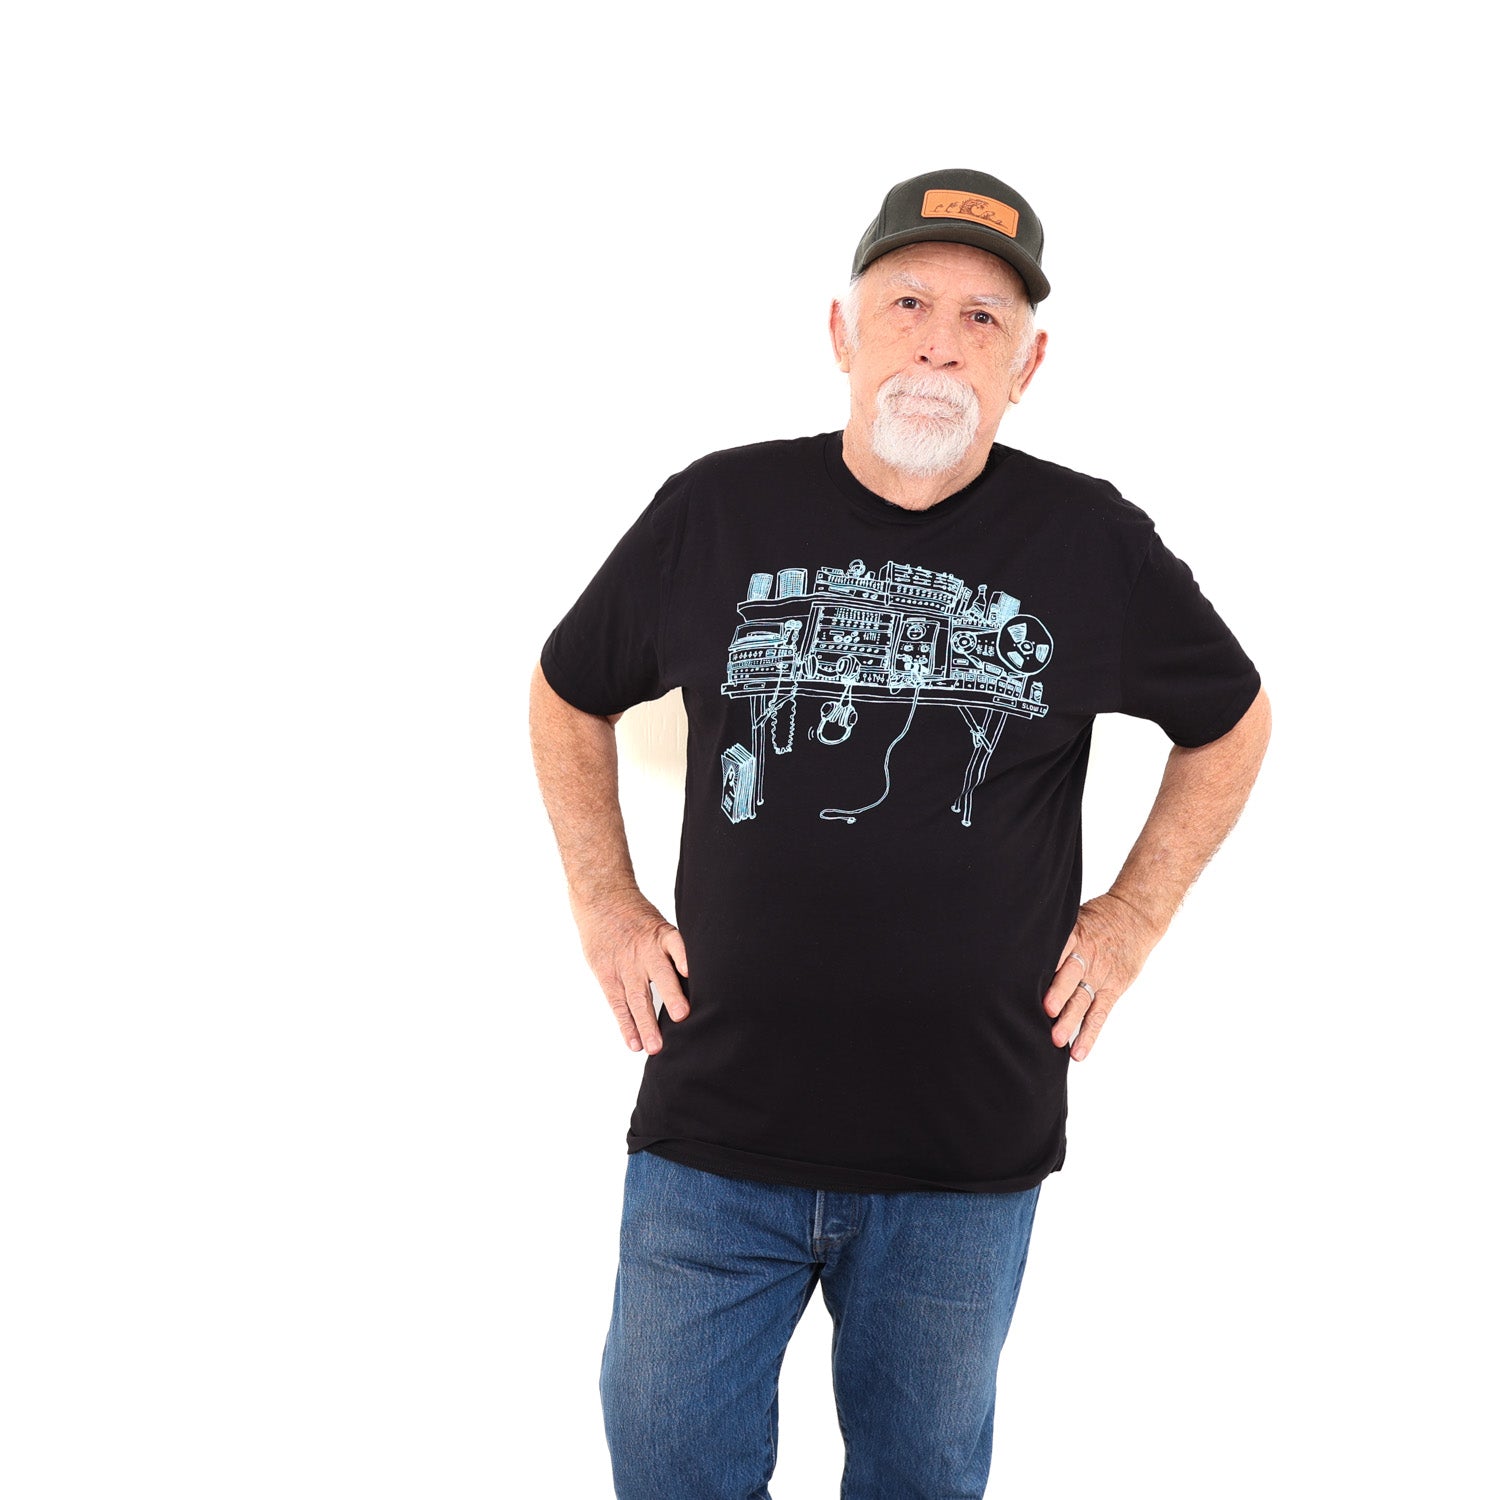 Man wearing hat standing with hands on his hips in a white background. Man is wearing black t-shirt with light blue ink of a recording studio